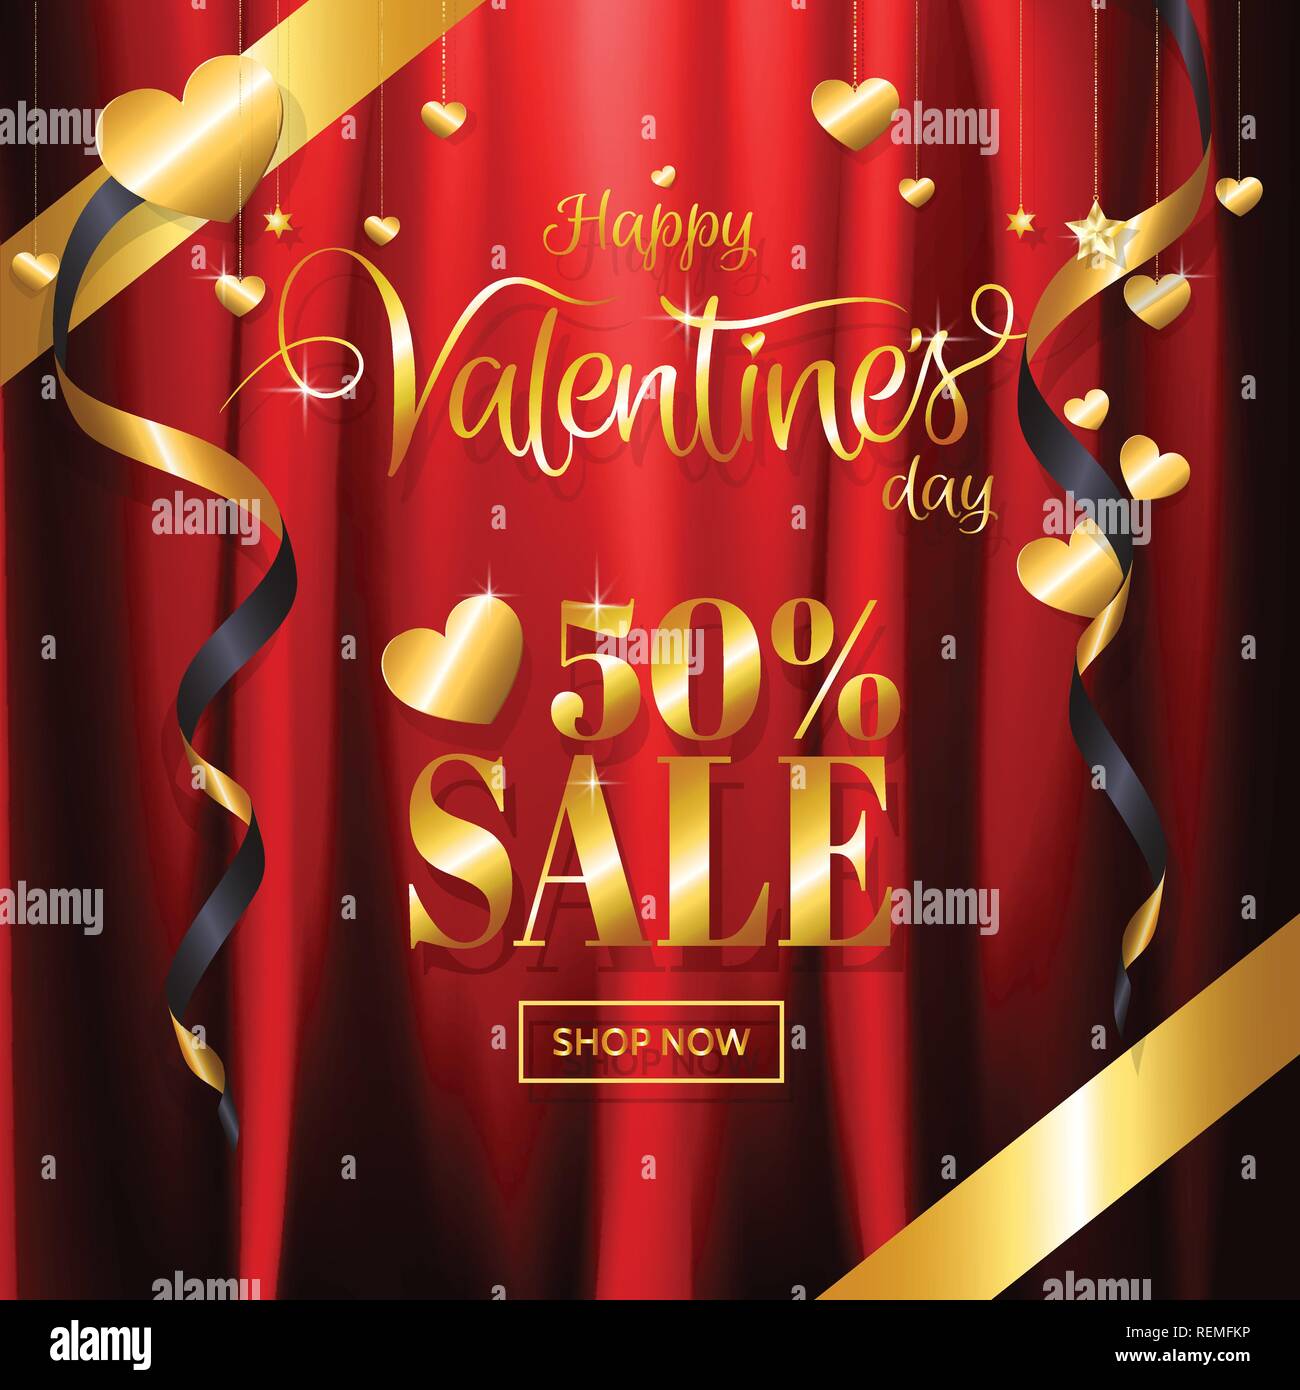 Luxury Valentine's day sale with red gold background calligraphy and glitter heart, star ornamental decoration on red satin fabric background for prom Stock Vector